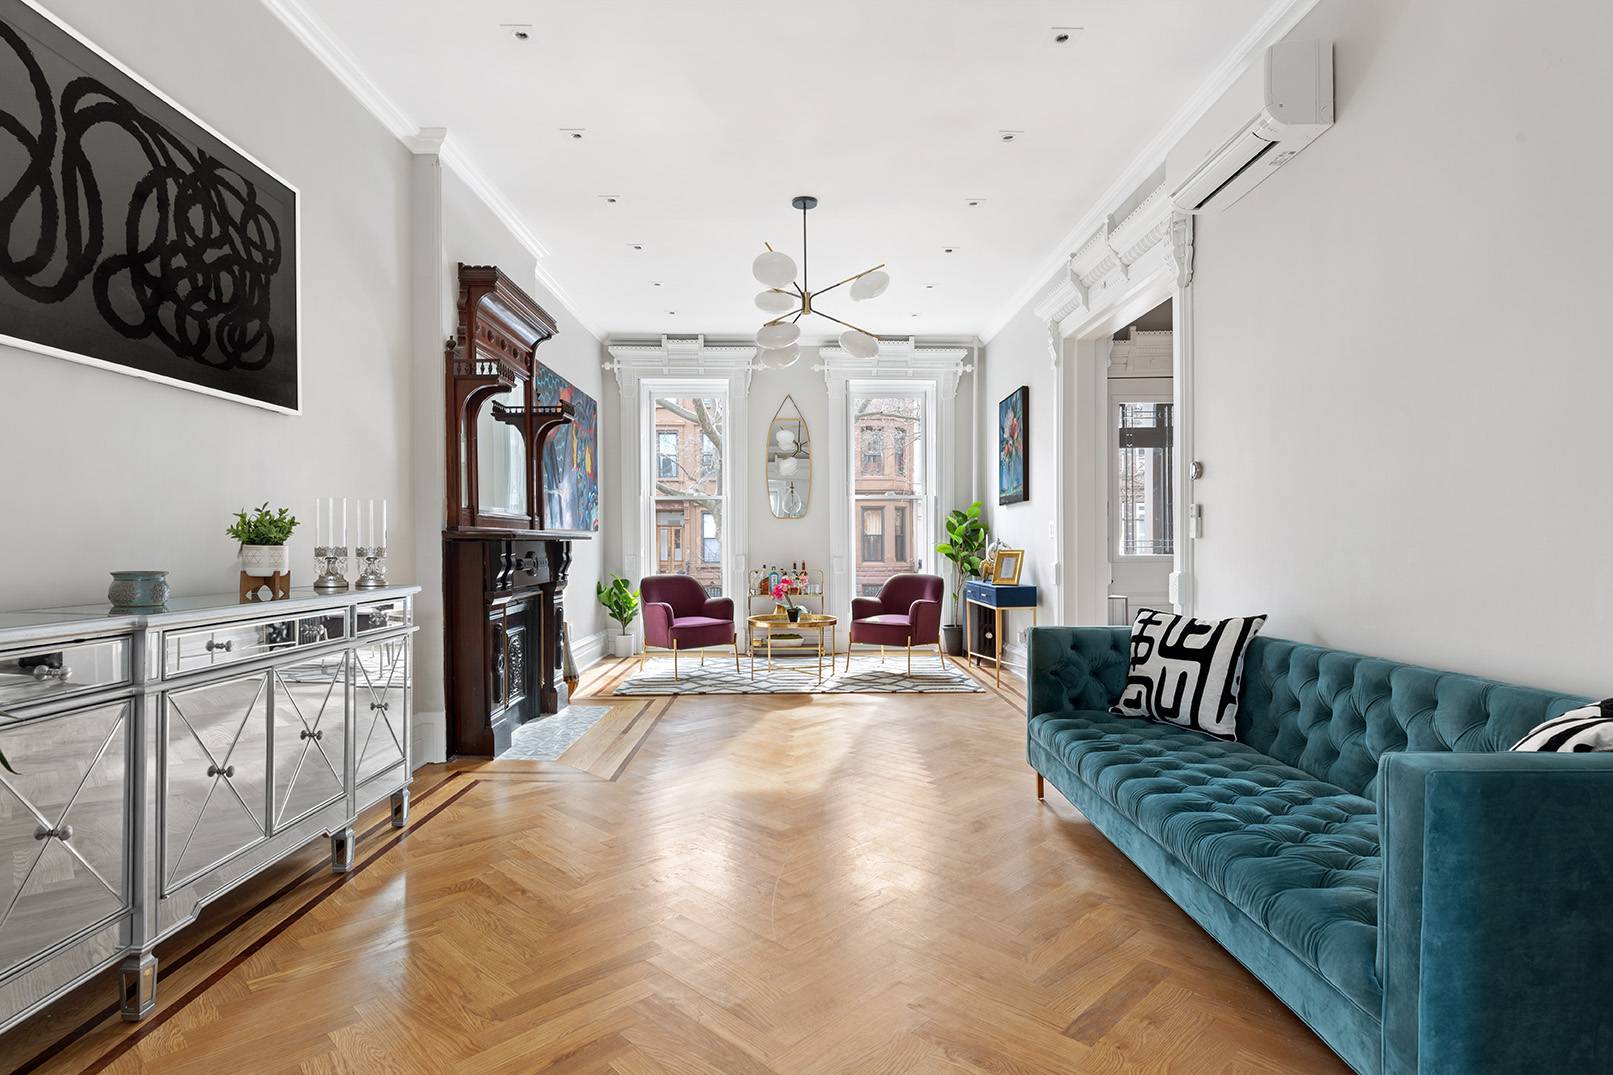 Welcome to 579 Madison Street located on one of the most coveted Brownstone streets in bucolic Stuyvesant Heights !